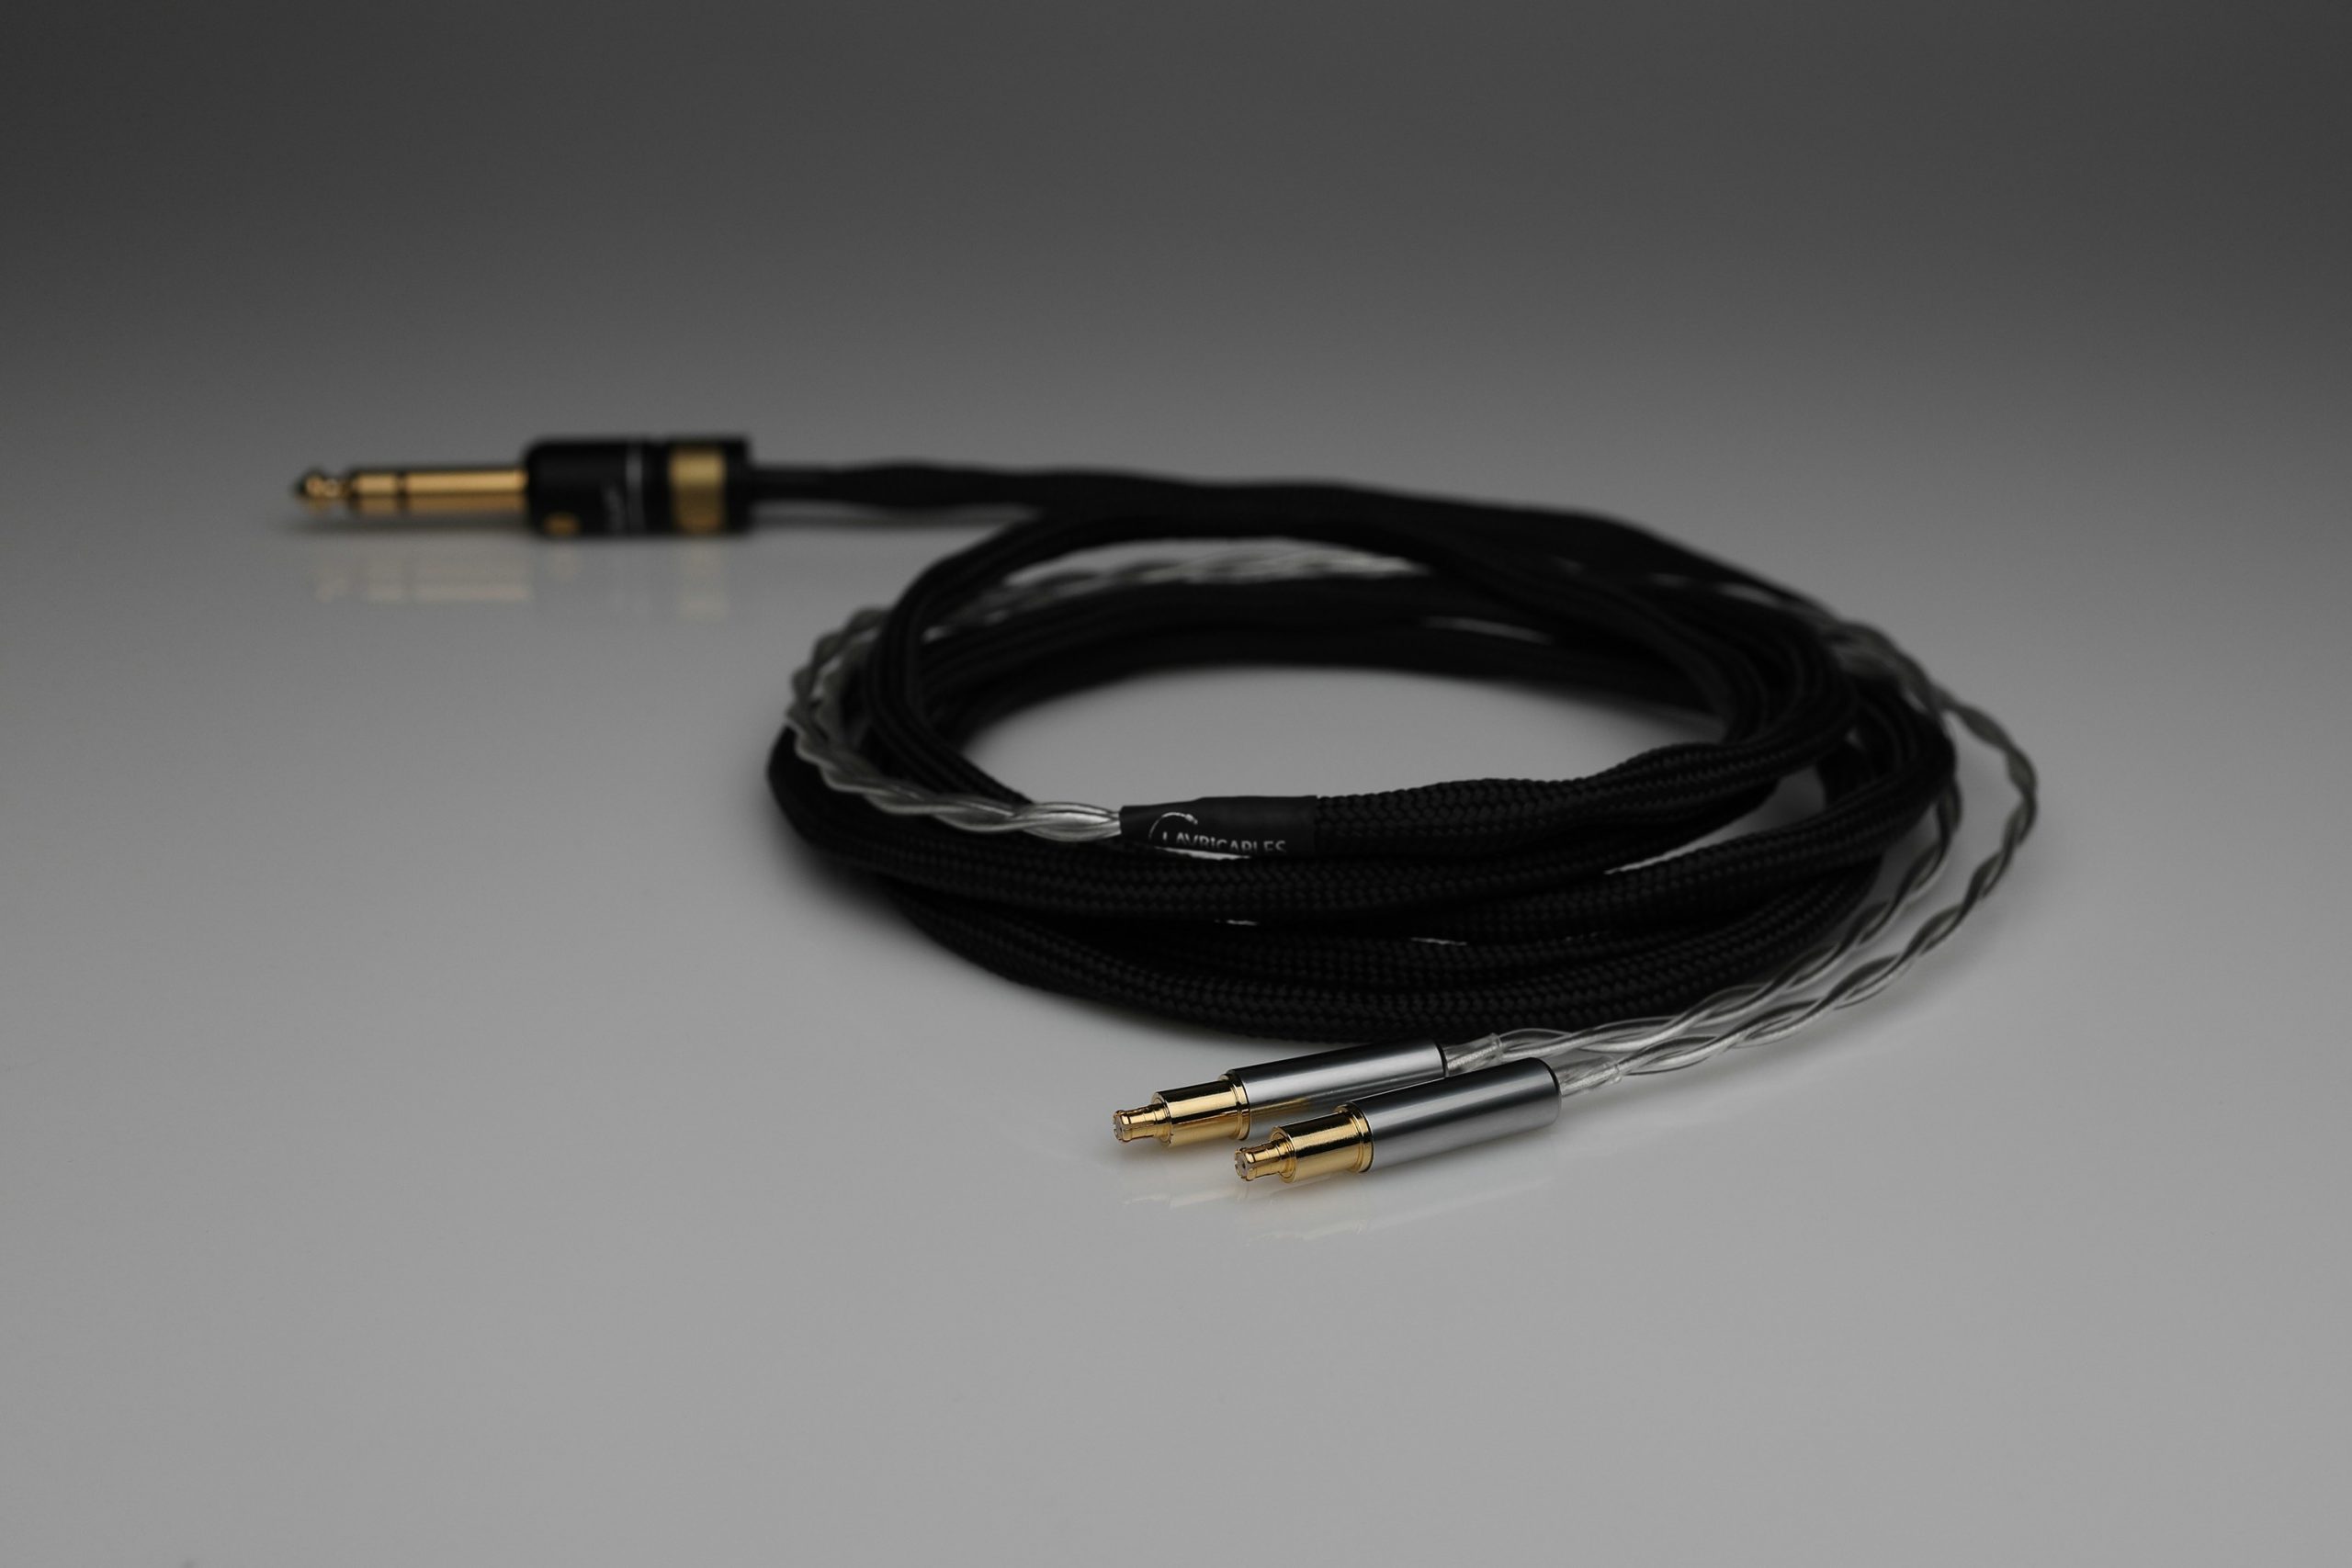 Ultimate Silver Audio Technica ATH-ESW750 ESW950 ESW990 ADX5000 WP900  AP2000 Ti ATH-AWKT ATH-AWAS upgrade cable